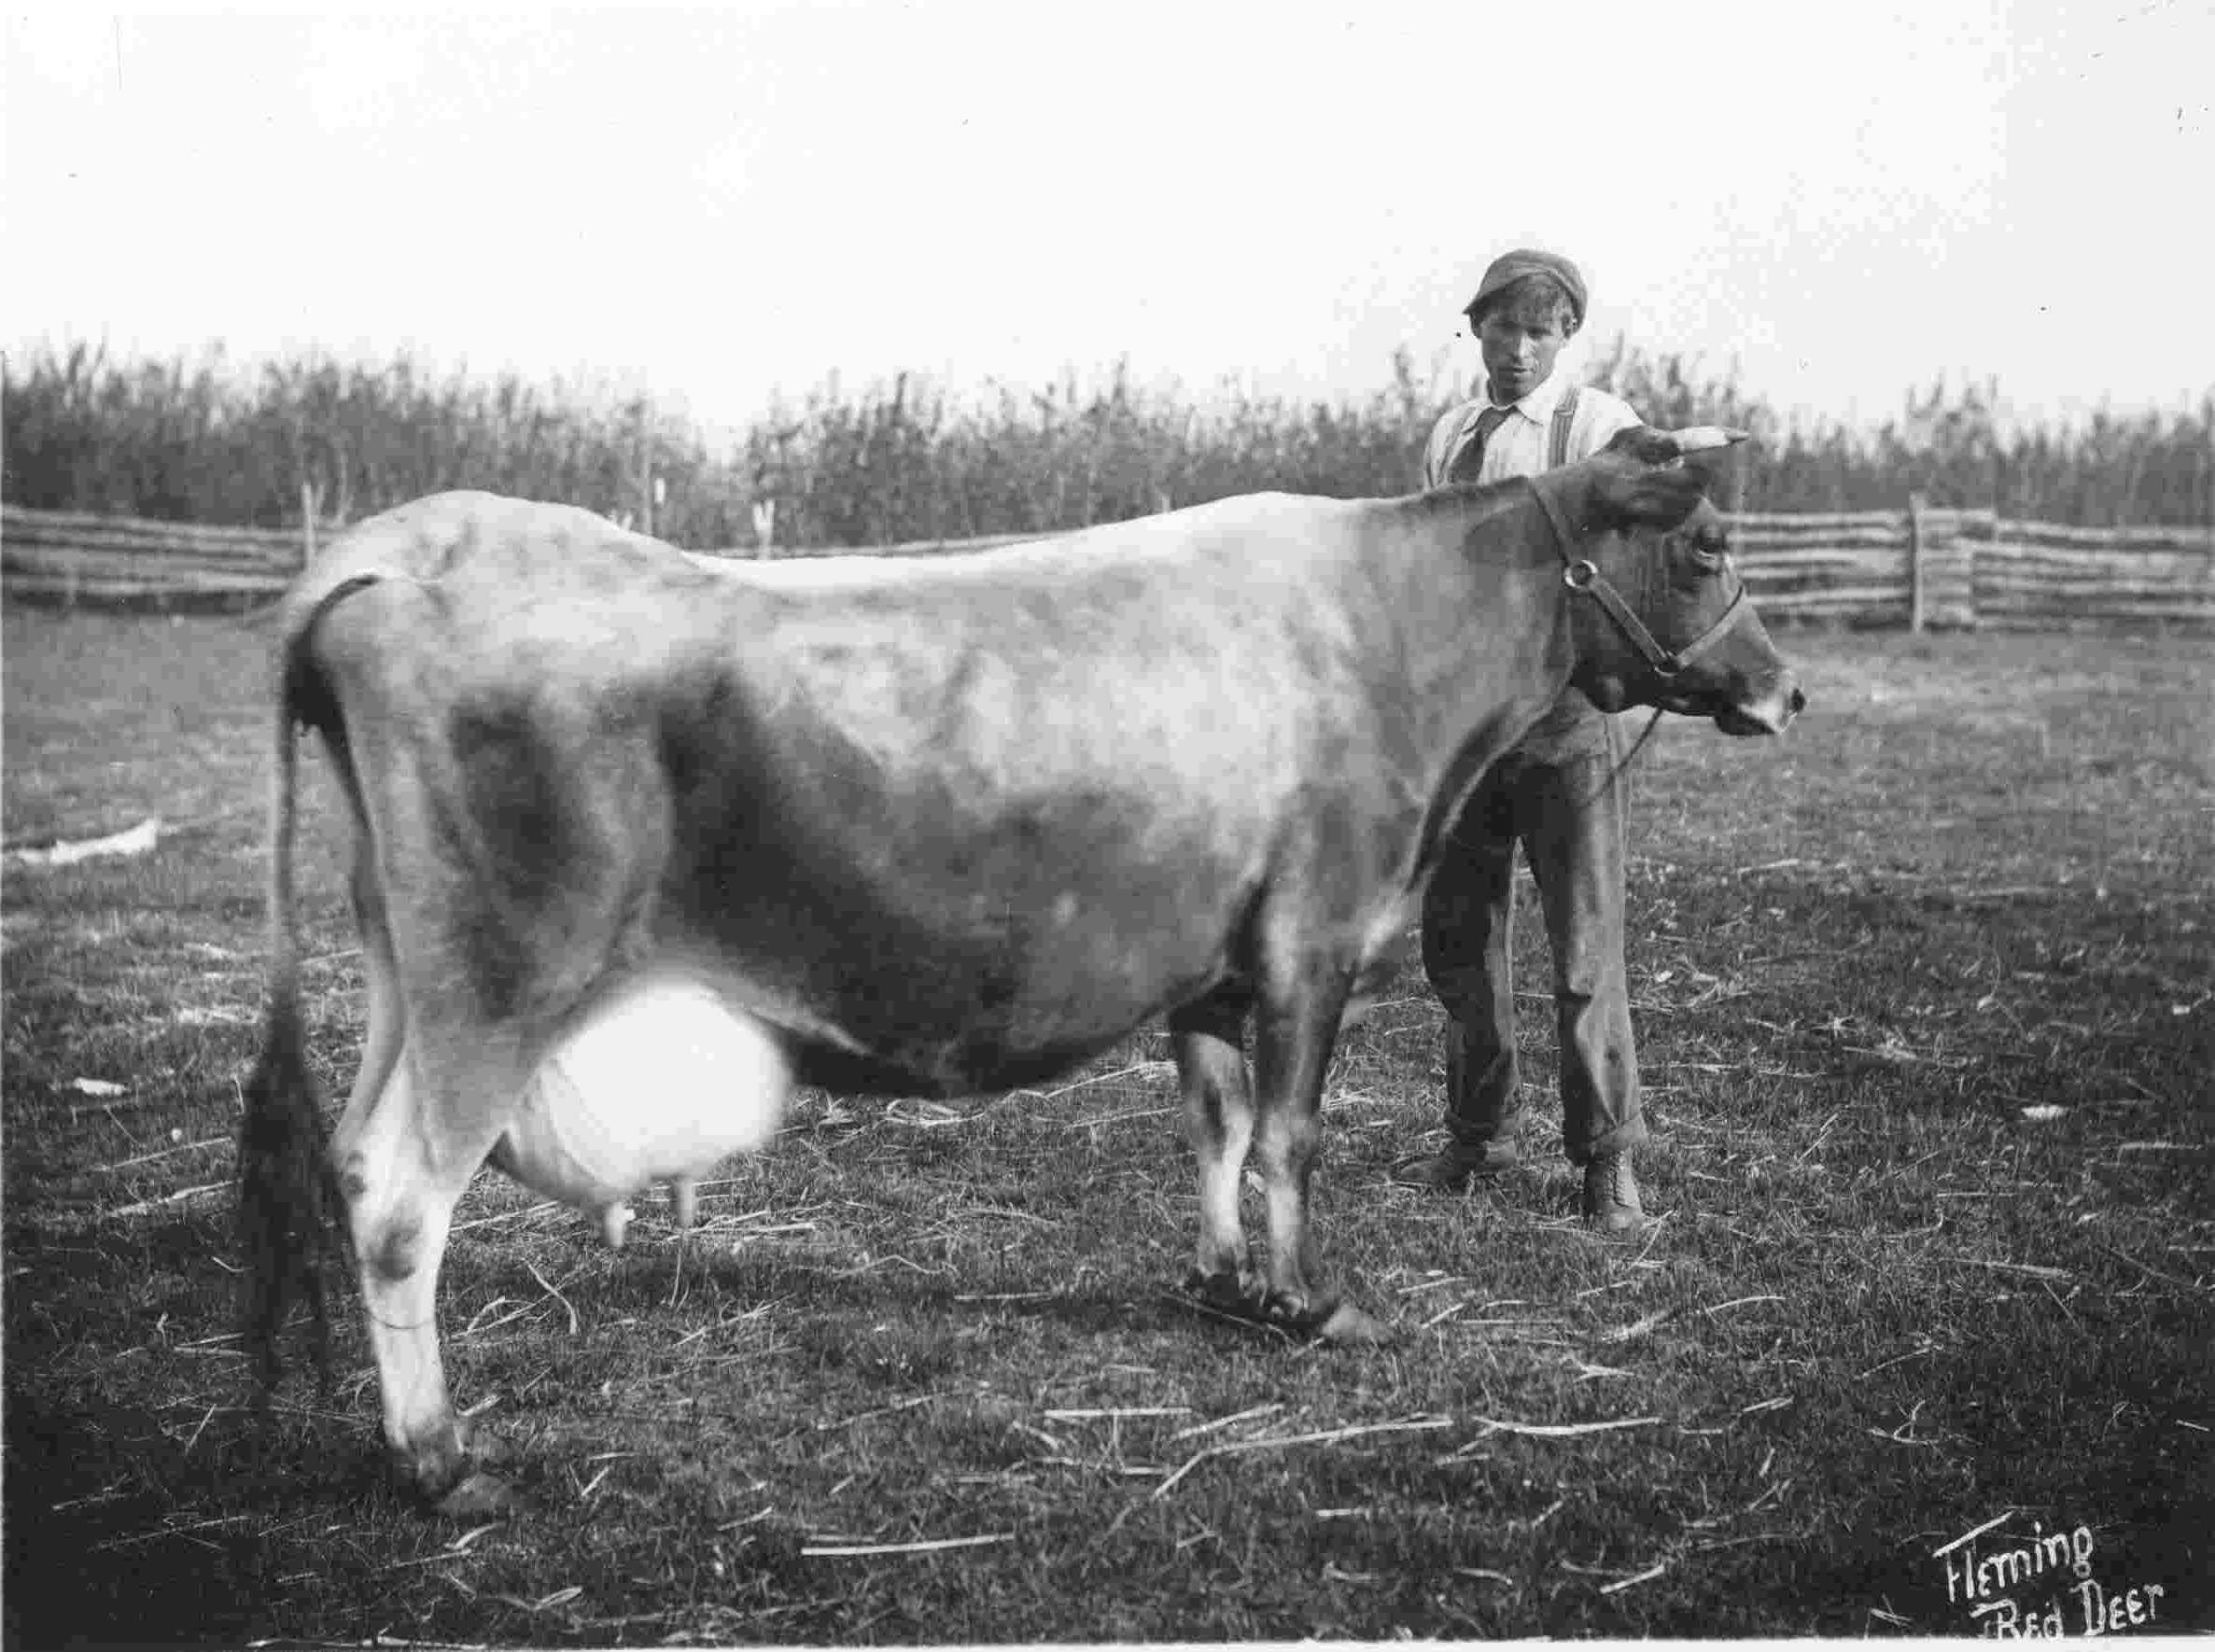 PRIZED COW - Rosalind of Old Basing with her herdsman